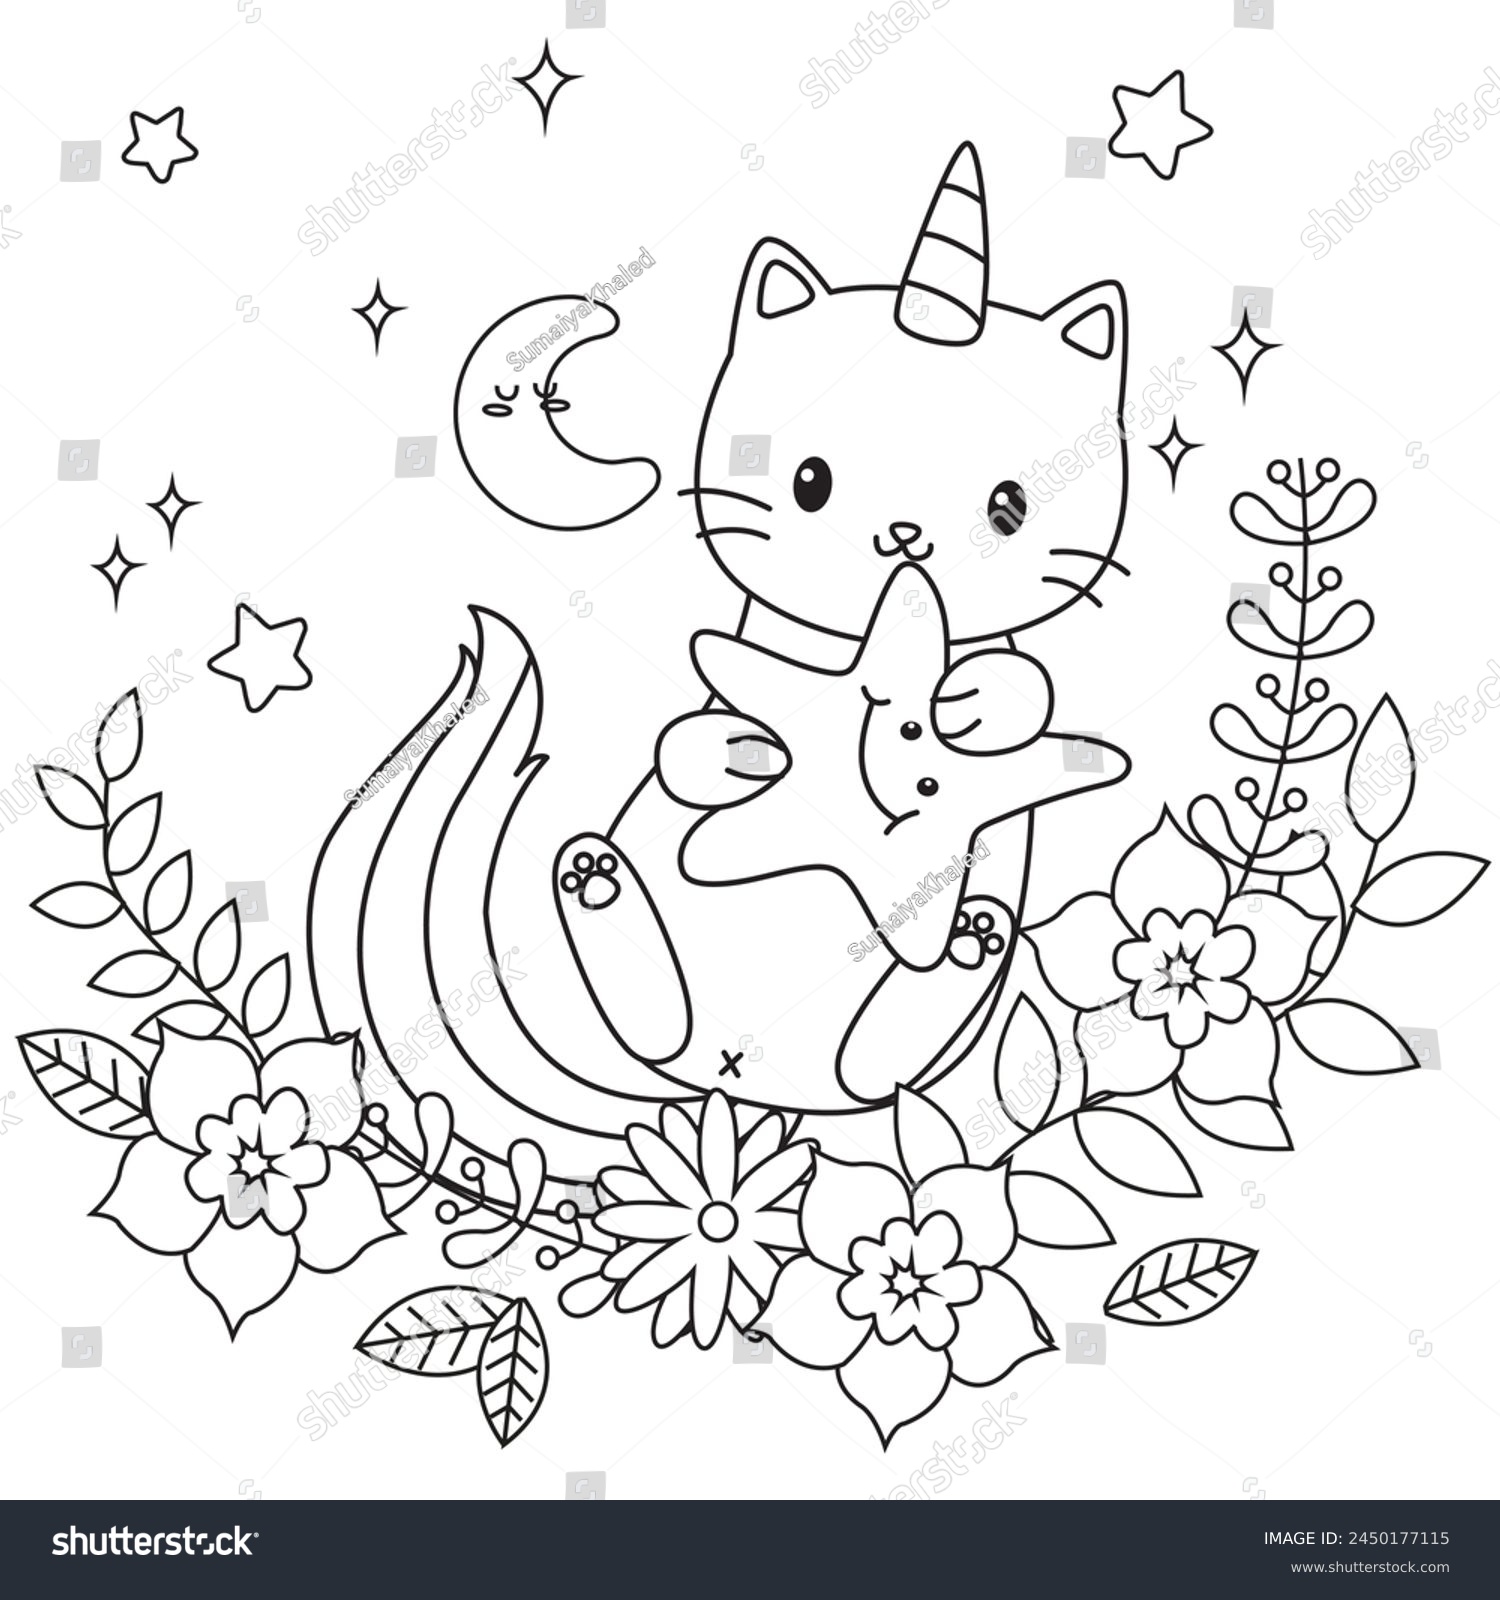 SVG of HD printable caticorn and cat unicorn or anime cat coloring pages for children kids and adults. Children coloring pages, caticorn coloring pages, learning for kids. Cat Vector svg